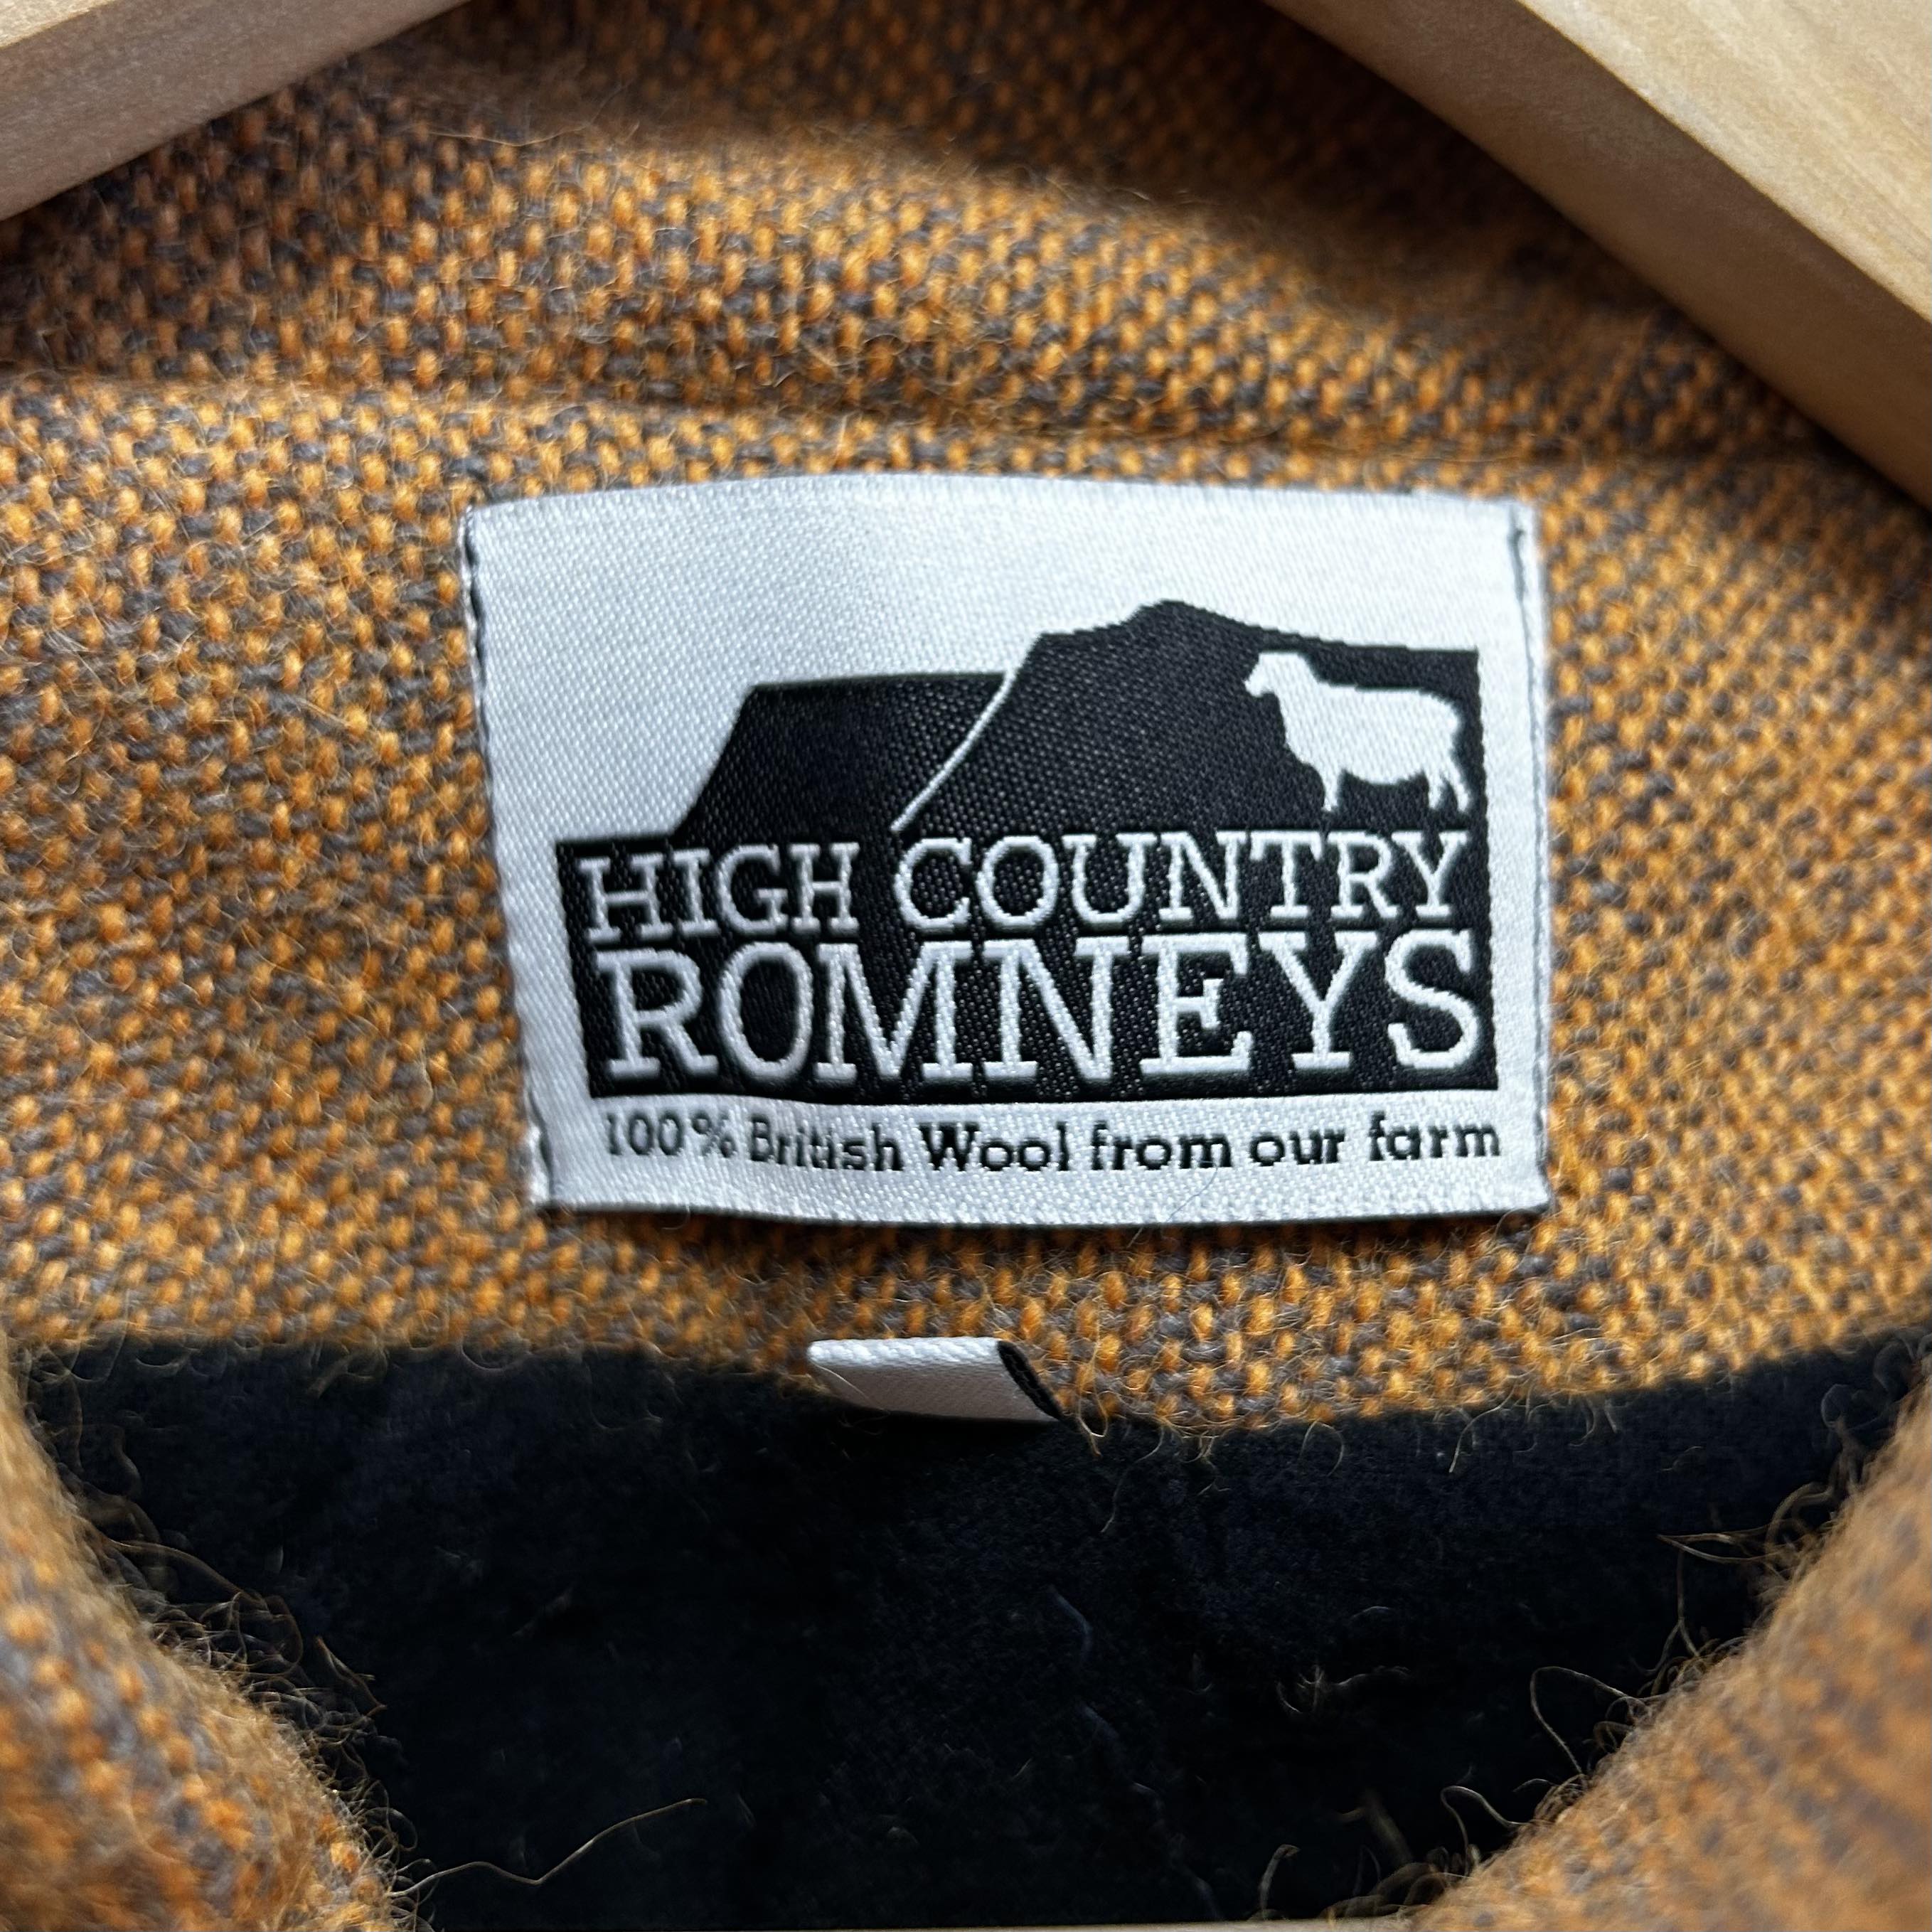 High Country Romneys 100% British Wool Jackets